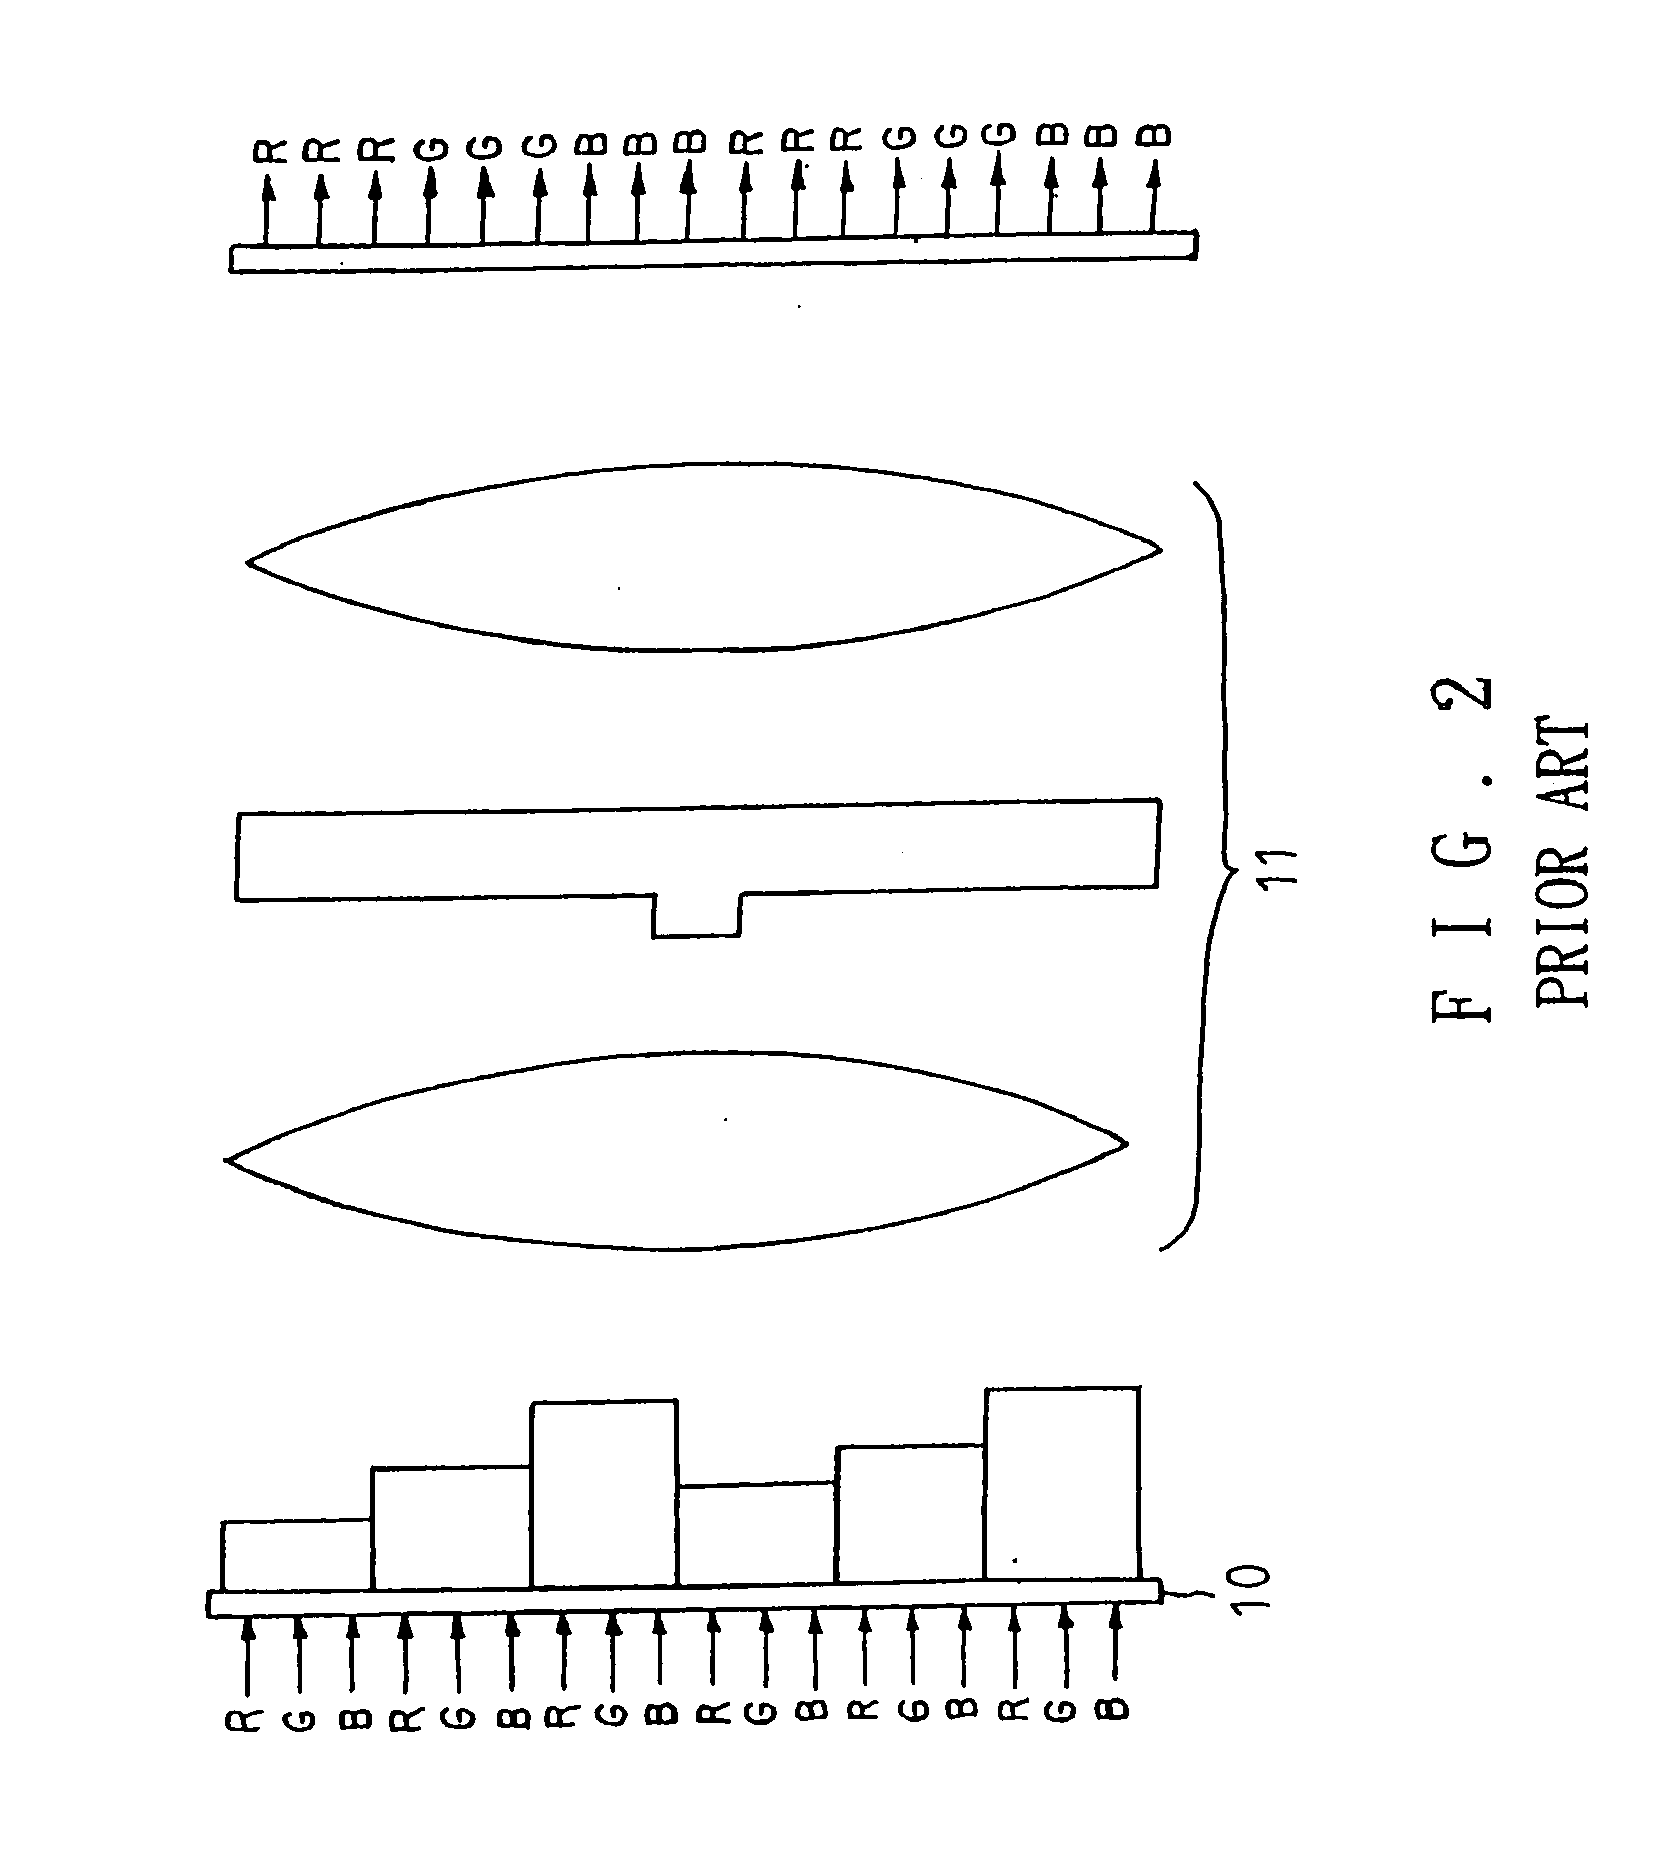 Micro-structure color wavelenght division device